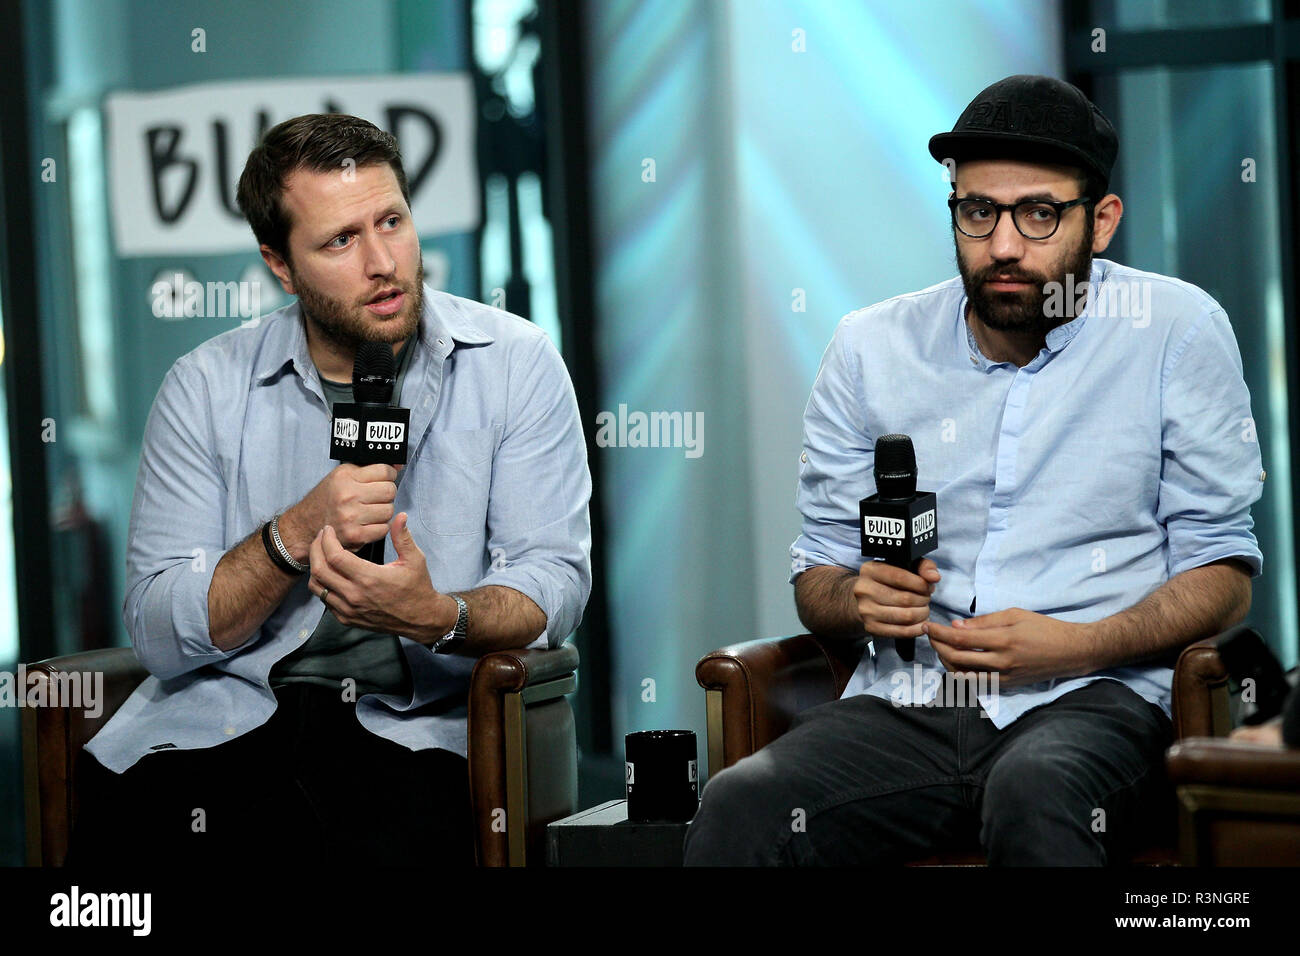 NEW YORK, NY - JULY 07:  Producer/Director Matthew Heineman and journalist Abdalaziz 'Aziz' Alhamza visit Build to discuss the new film 'City Of Ghosts' at Build Studio on July 7, 2017 in New York City.  (Photo by Steve Mack/S.D. Mack Pictures) Stock Photo